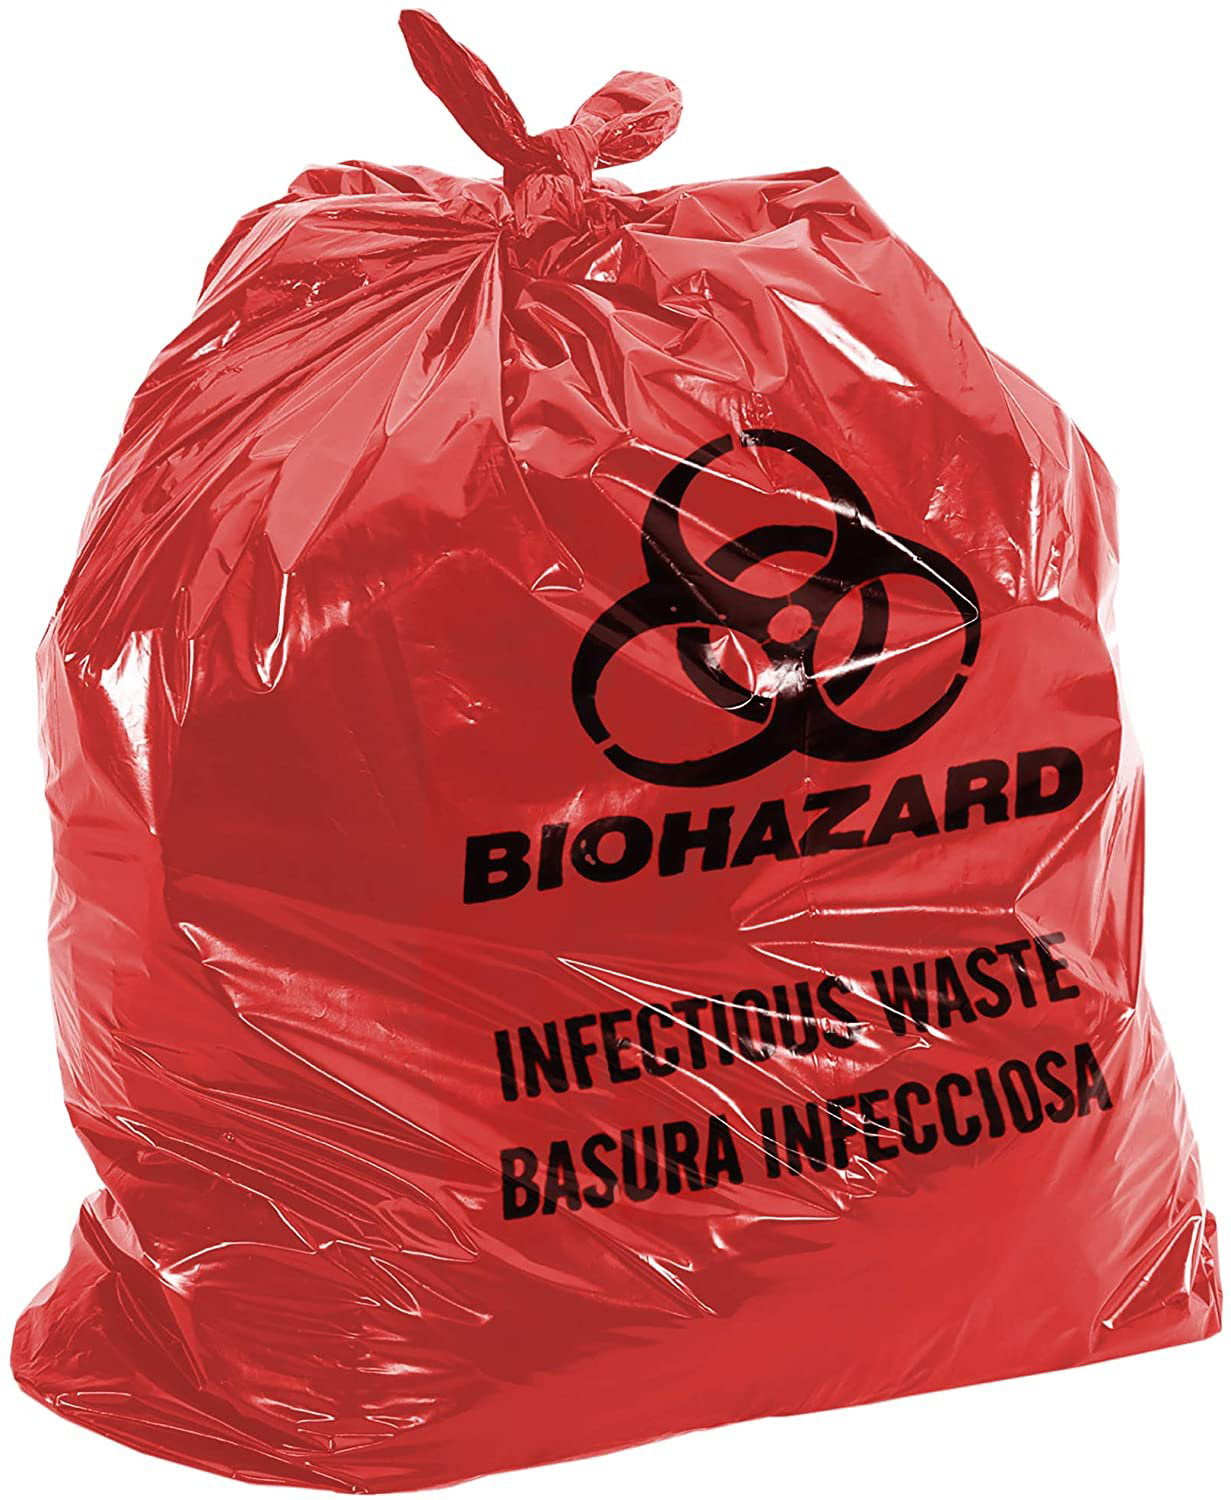 Wholesale Price APQ Pack of 25 Red Biohazard Waste Bag Liners 40 x 46 Disposable Plastic Lab Bags 40x46 Thickness 1.3 Mil Preprinted Poly Bags for Packing Trash Plastic Bags for Health Needs 